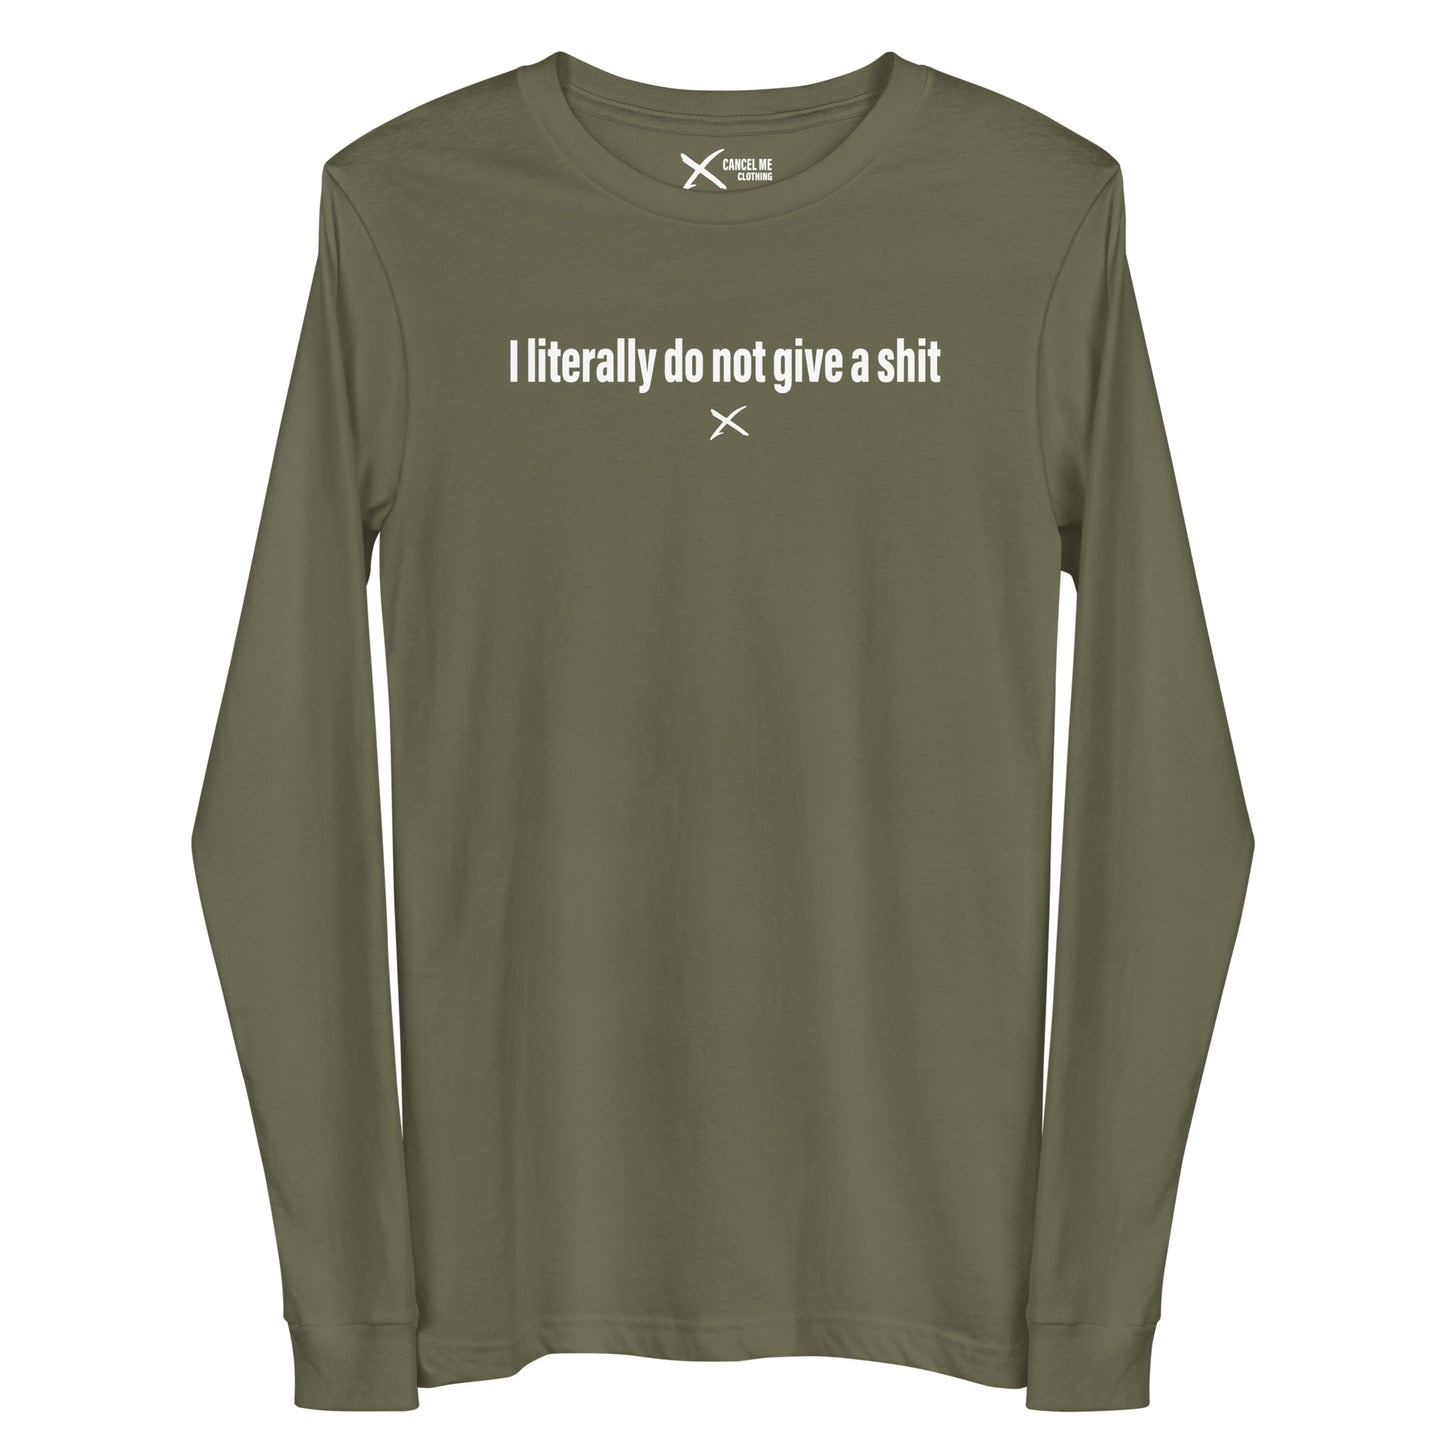 I literally do not give a shit - Longsleeve